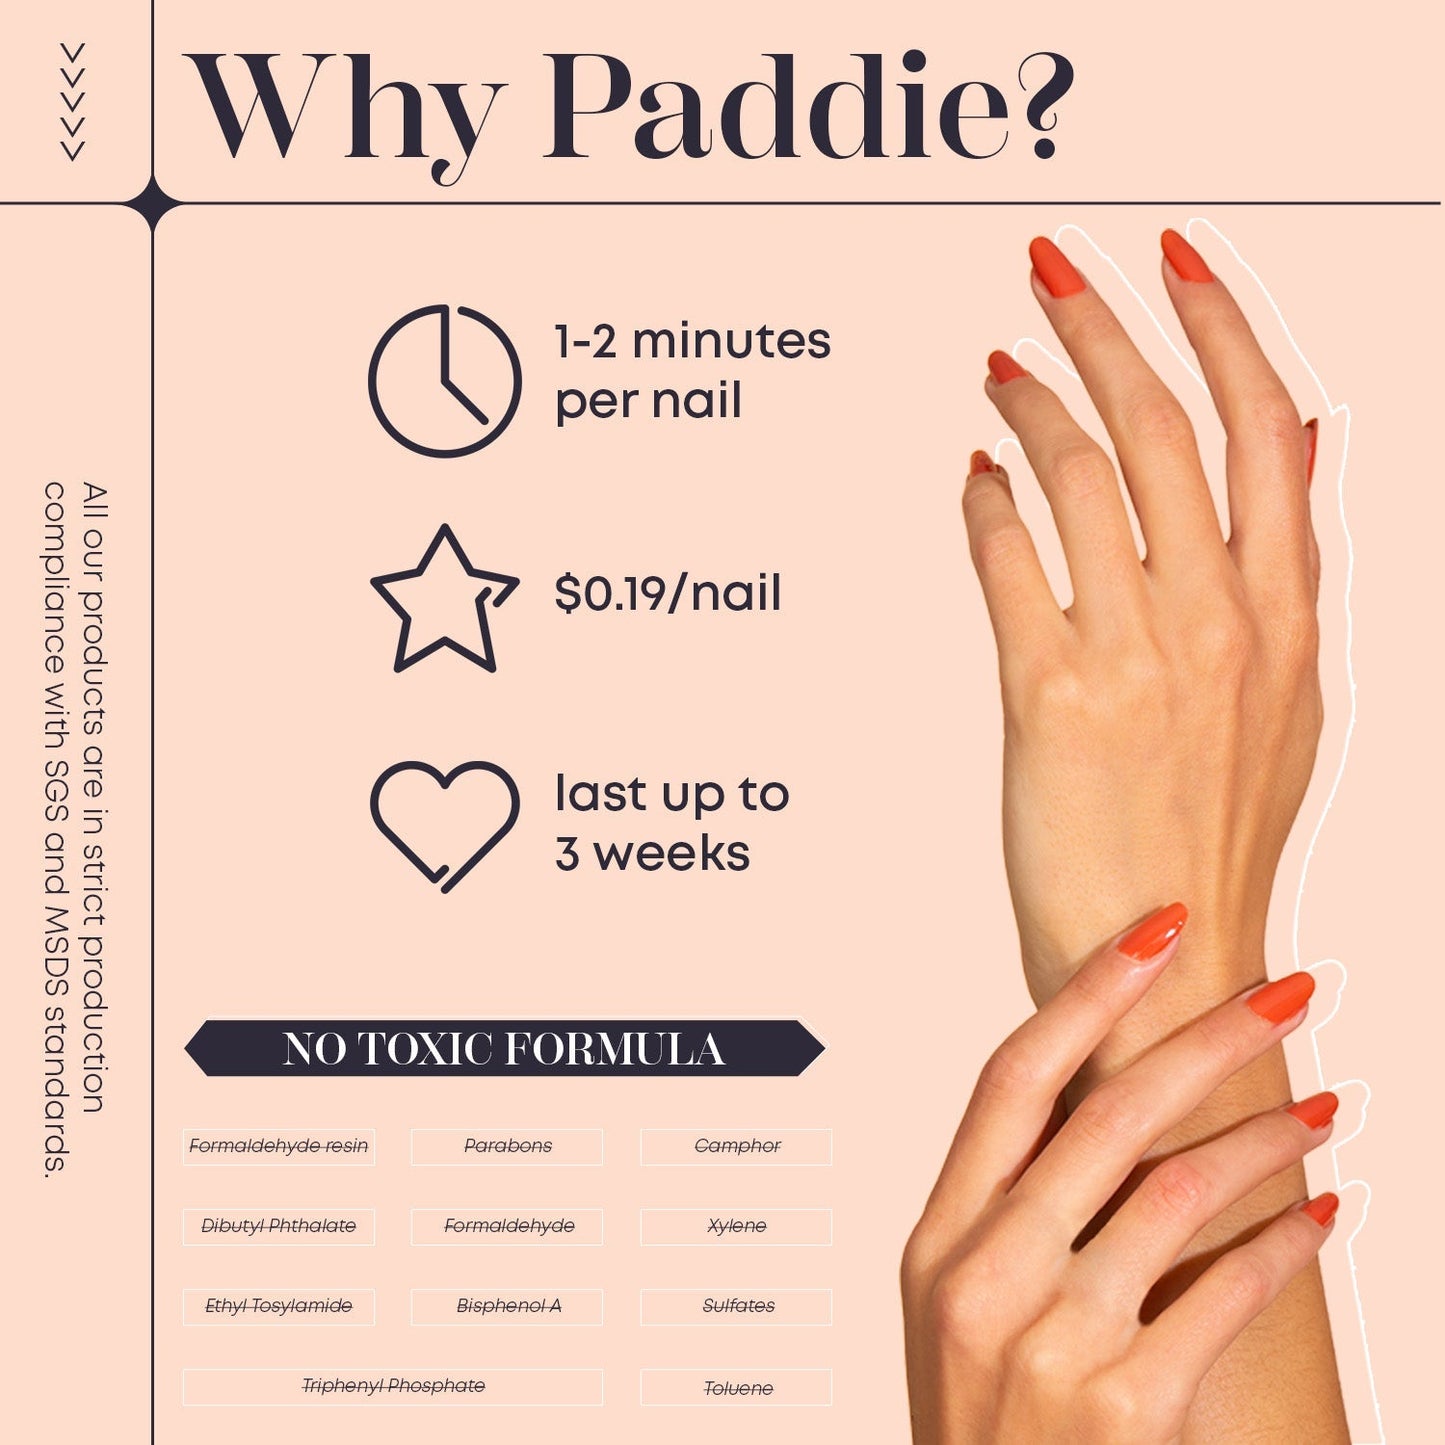 Paddie’s Polygel Expert Kit offers -  application in under 1-2 minutes per nail, costs only $0.19 per nail, lasts up to 3 weeks, and contains no harmful chemicals.